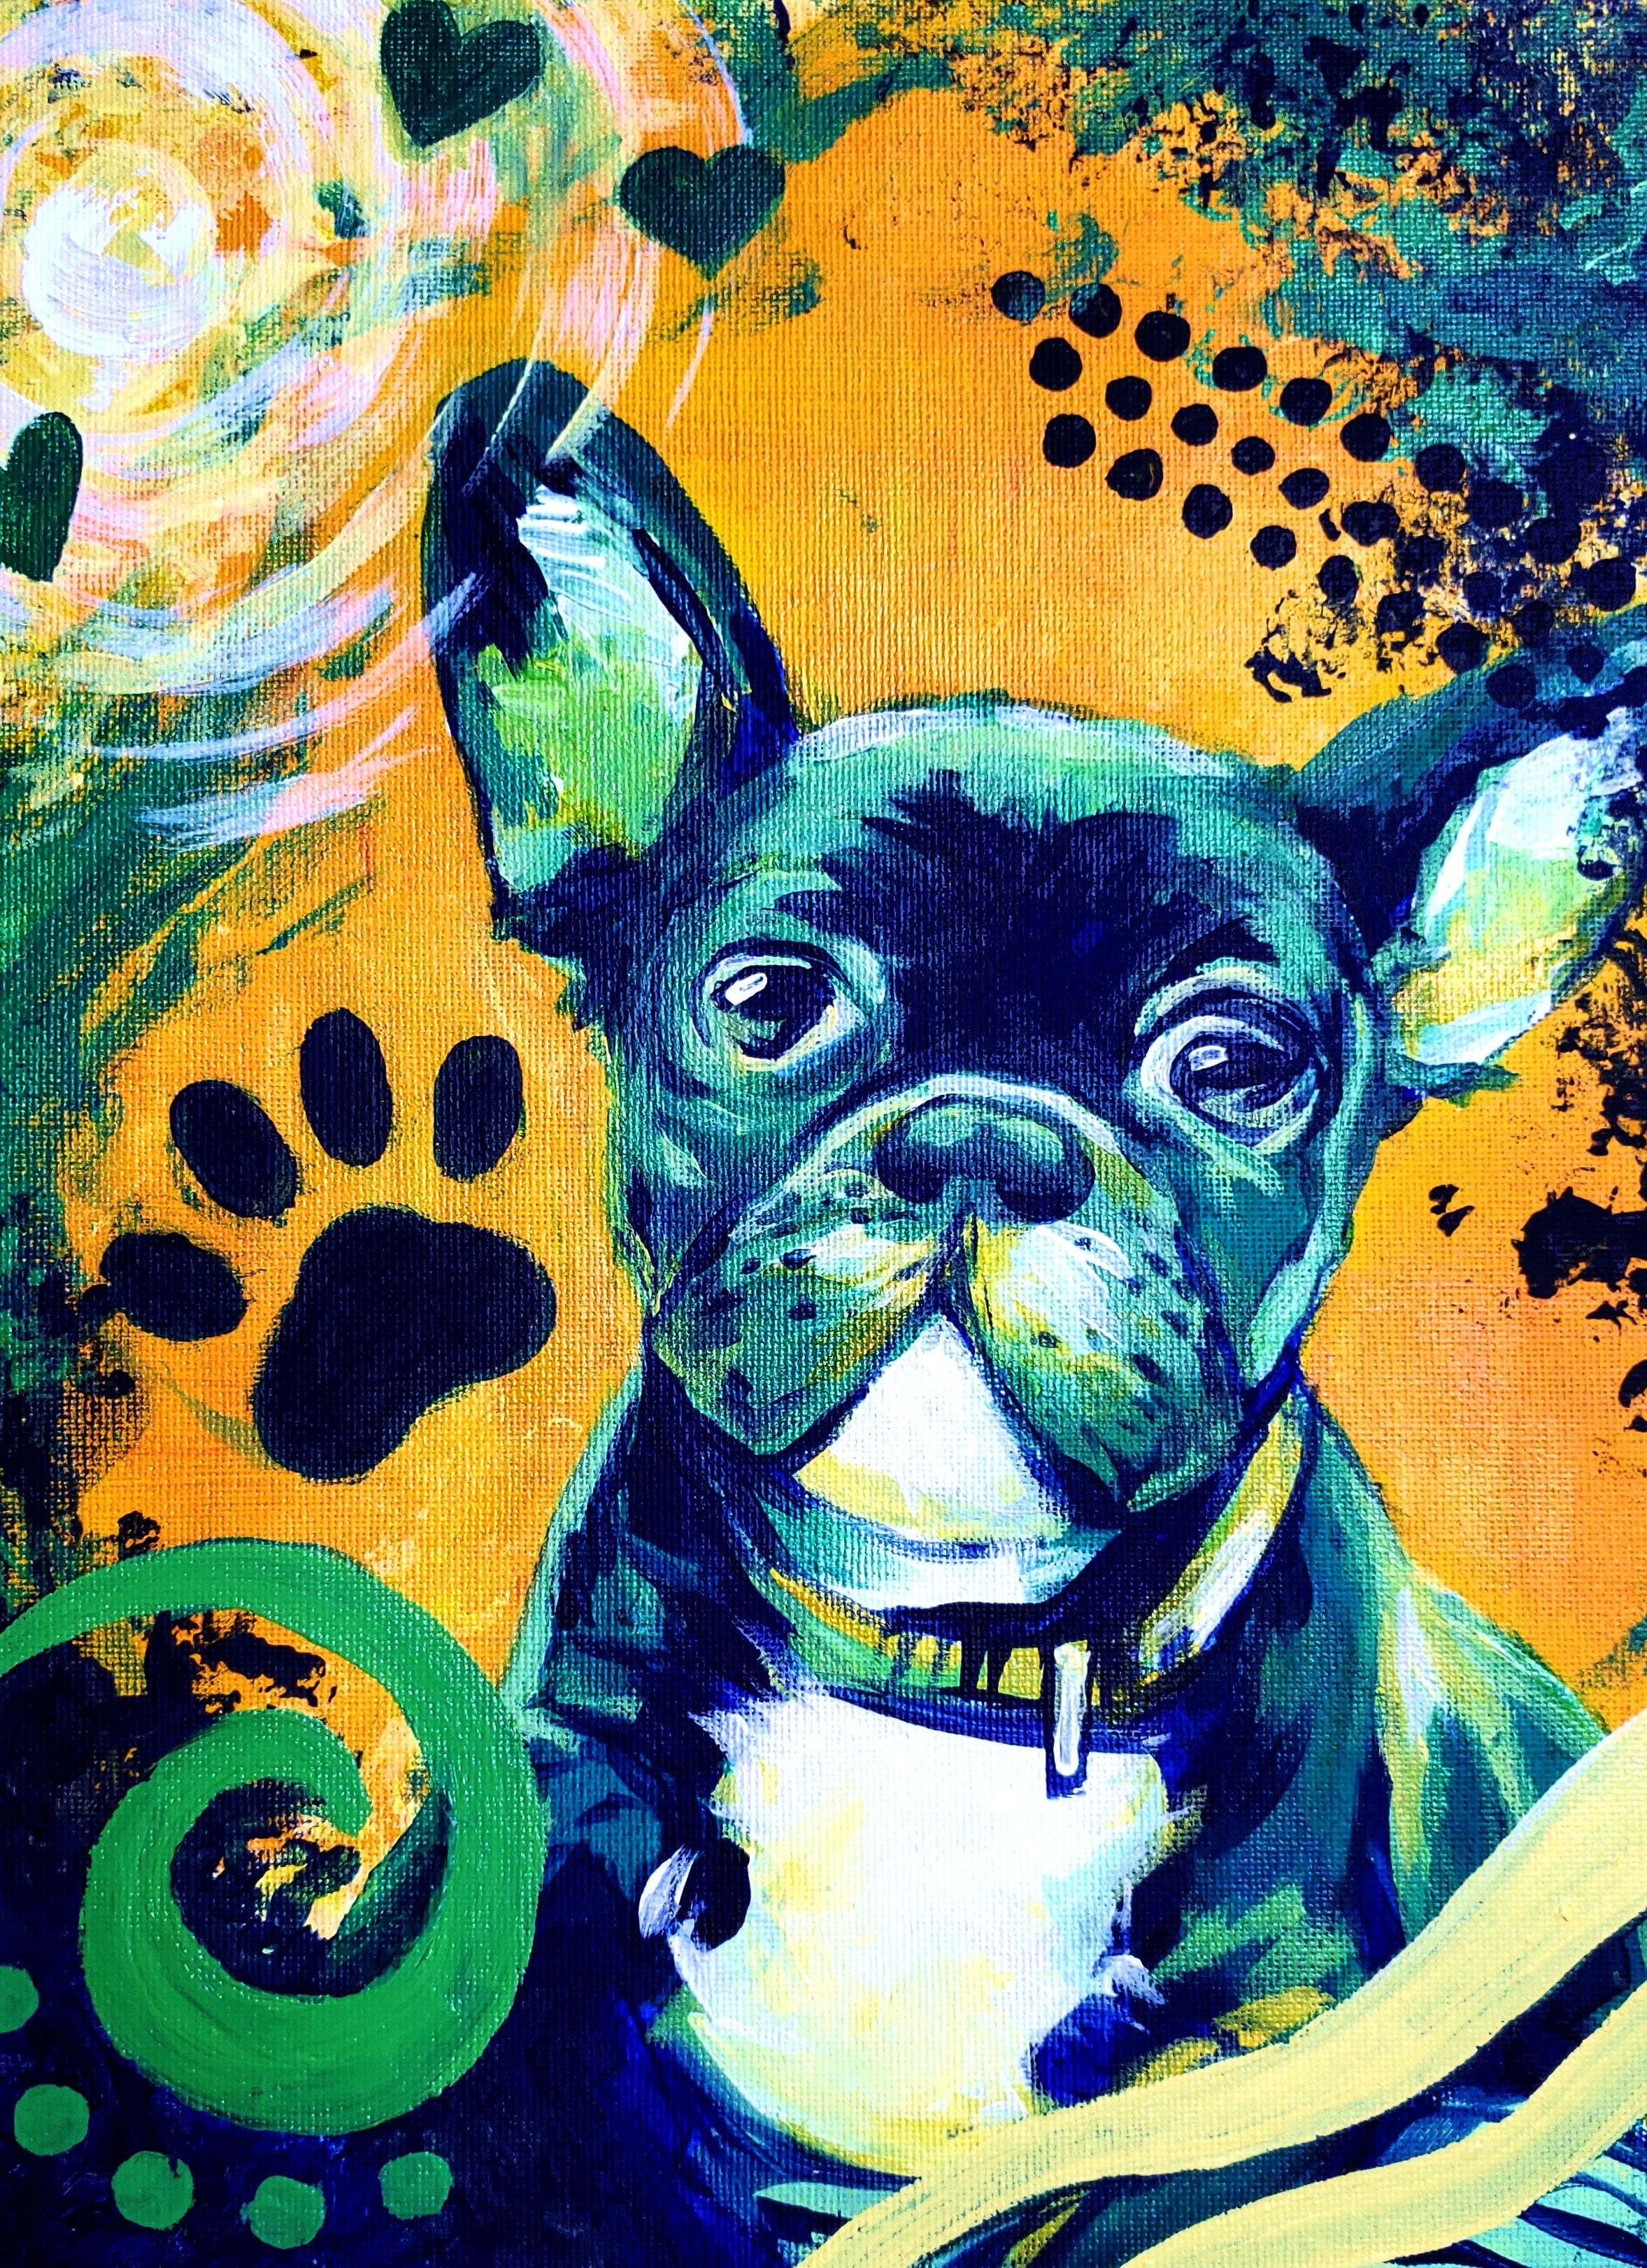 A Paint Your Pet Pop Art experience project by Yaymaker